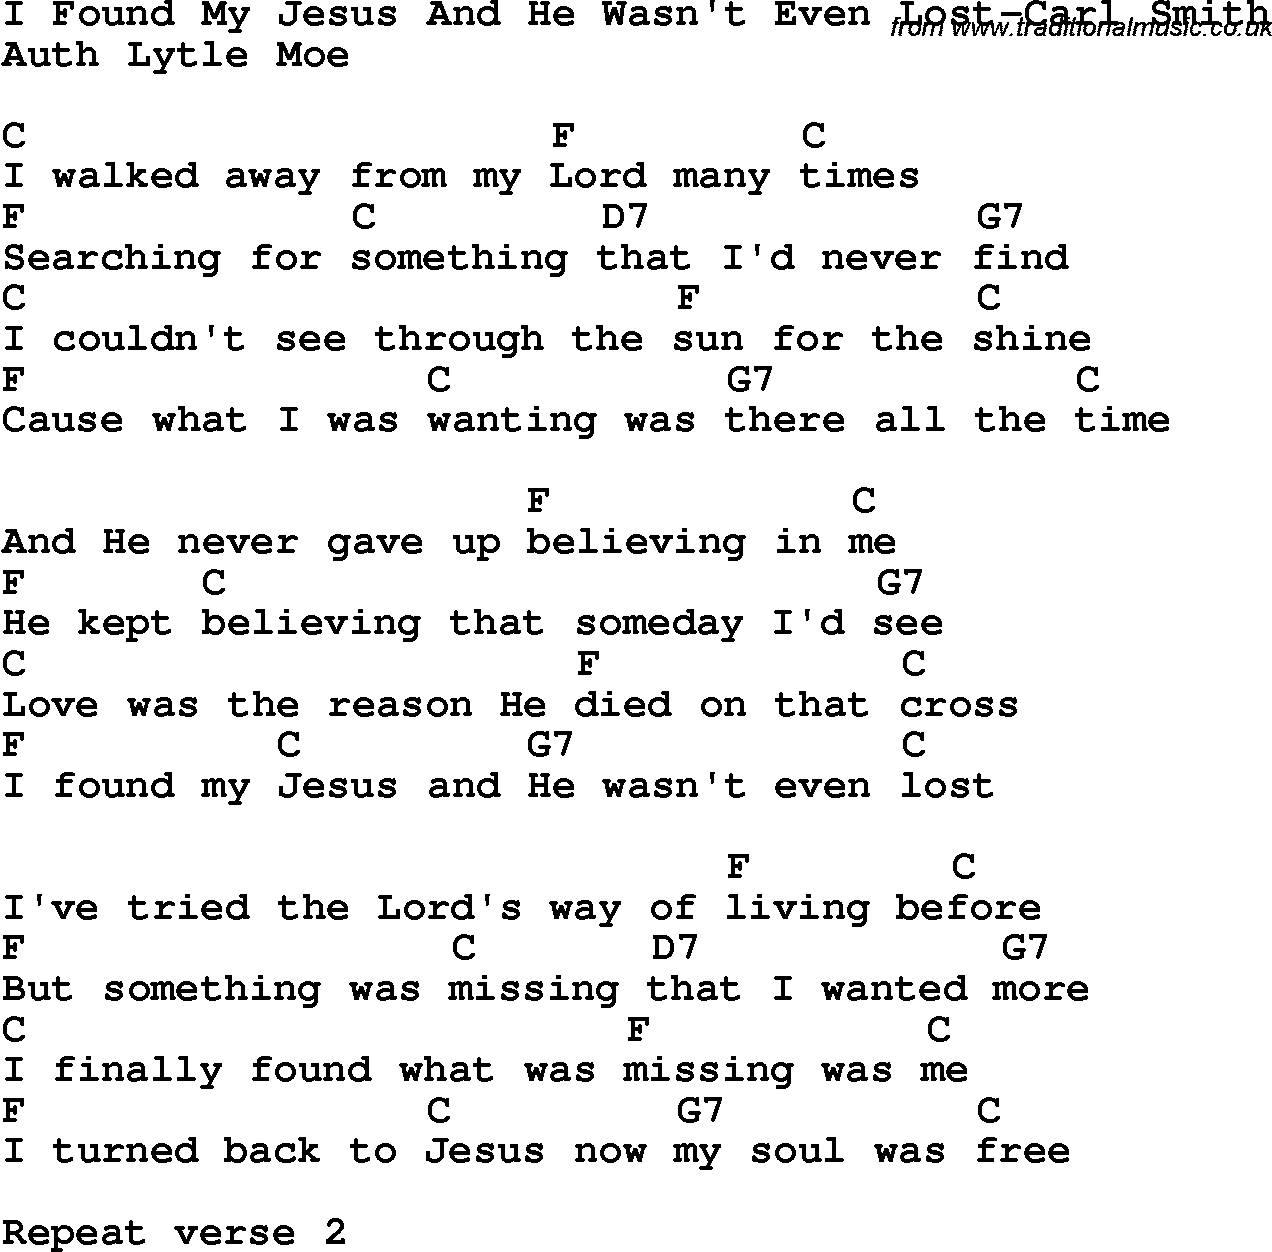 Country, Southern and Bluegrass Gospel Song I Found My Jesus And He Wasn't Even Lost-Carl Smith lyrics and chords